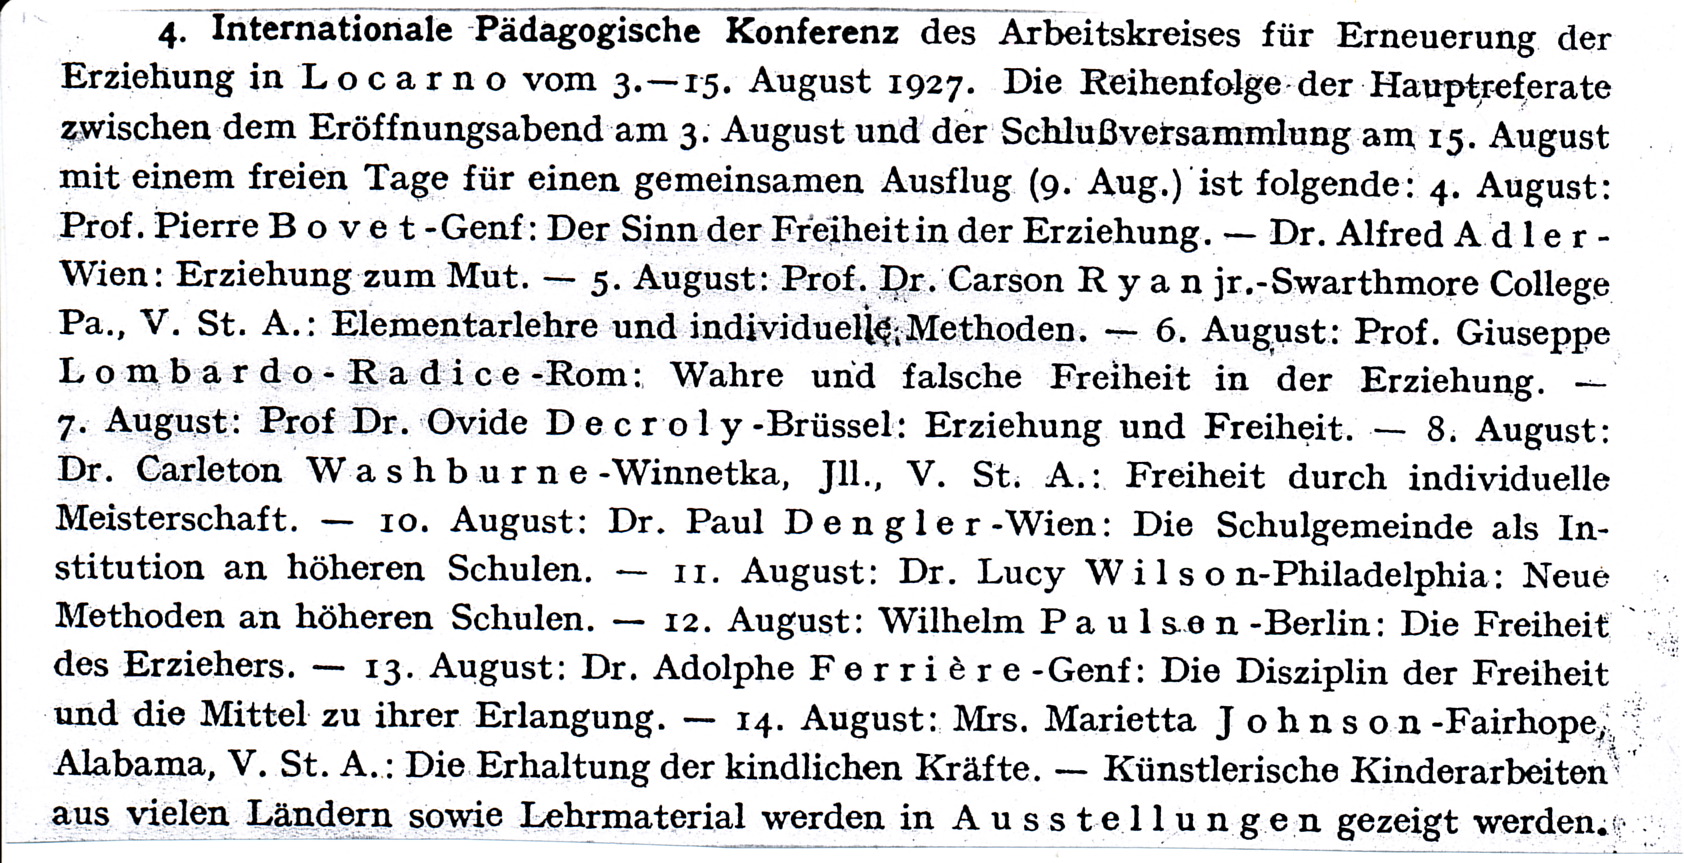 Main lectures at the 4th NEF World Conference, Locarno, 1927. Source: Pädagogisches Zentralblatt, 6, 1927, p. 452